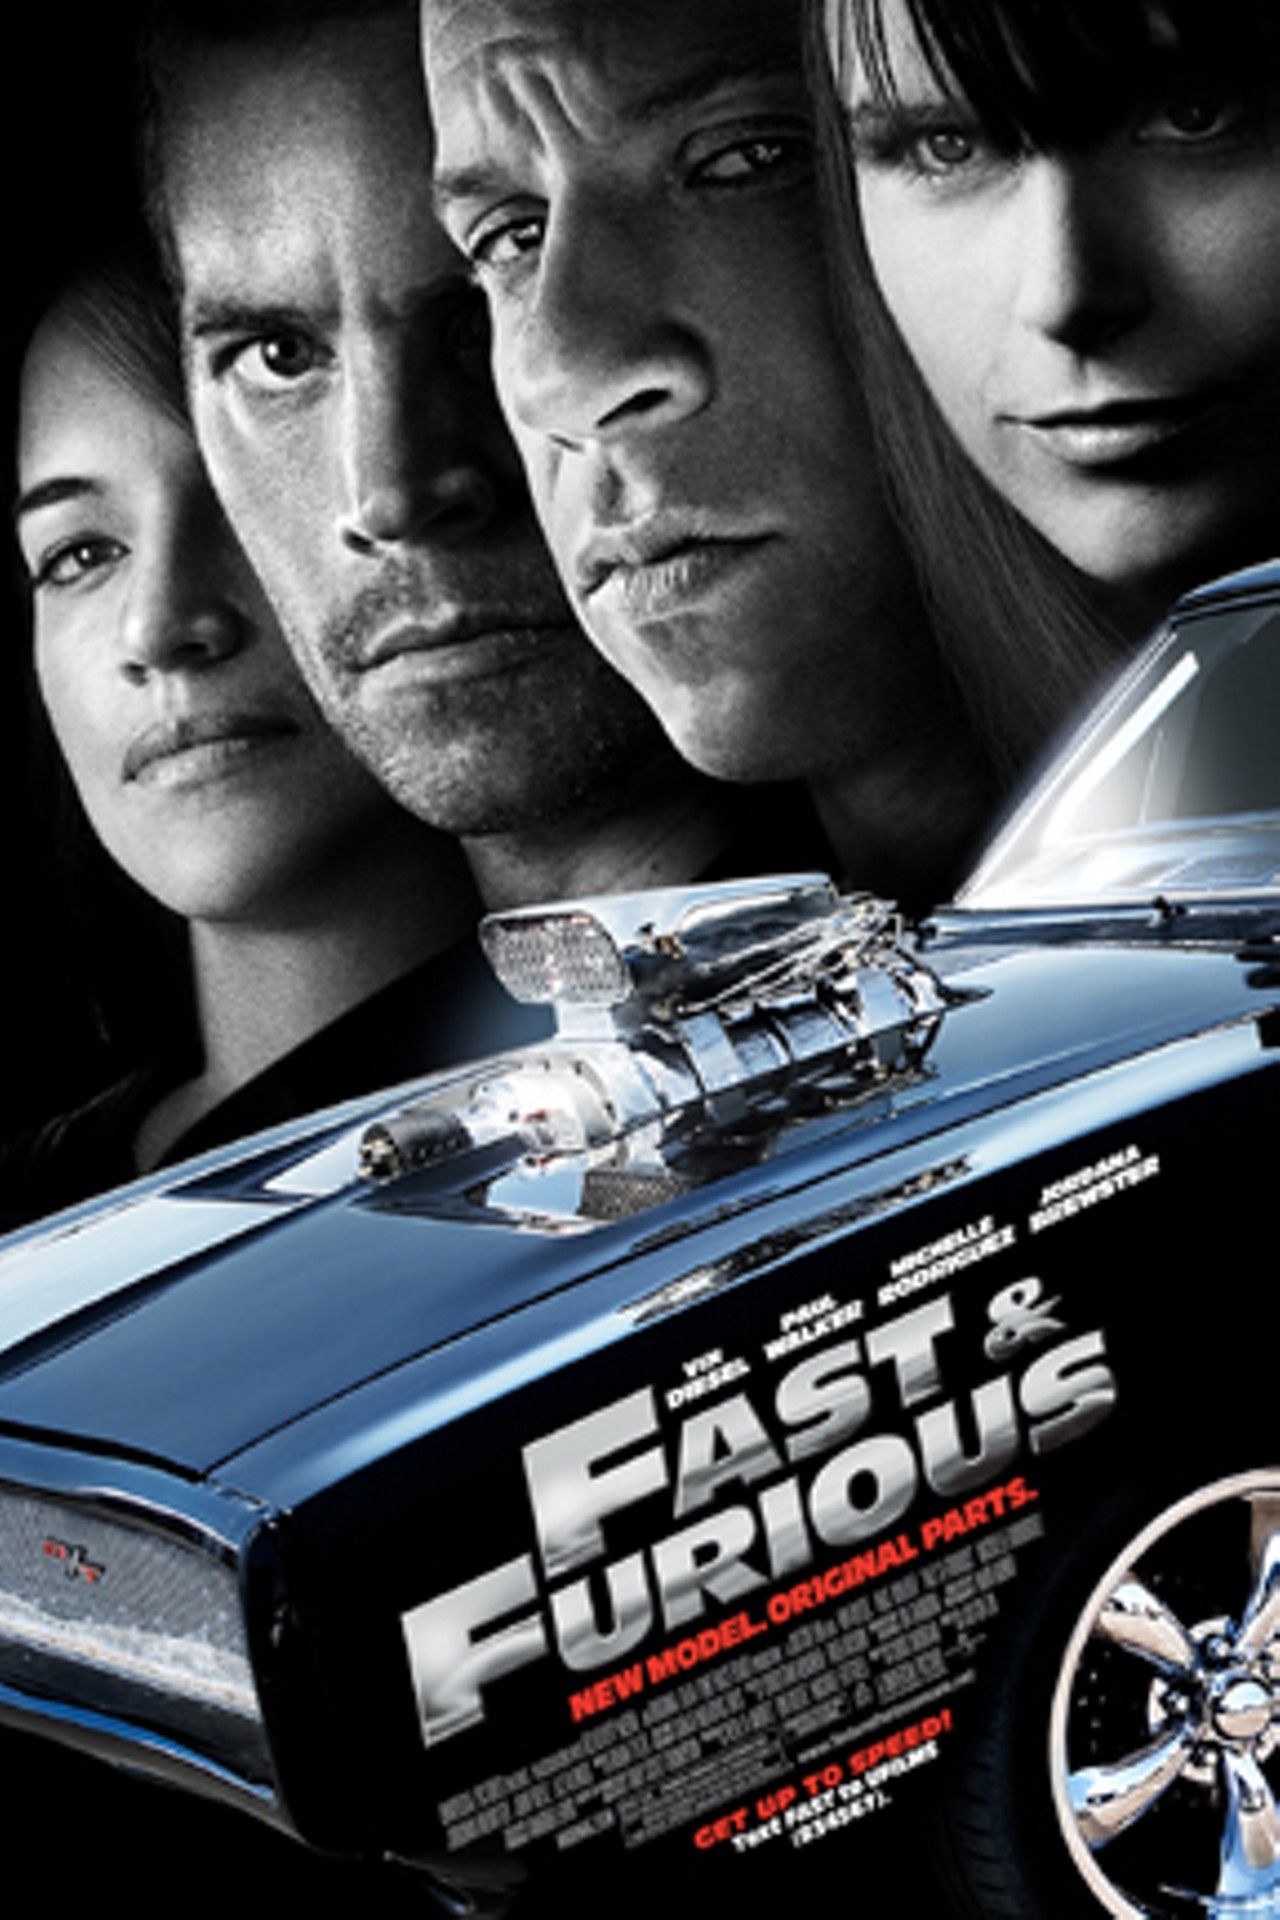 Fast and furious 4 movie poster